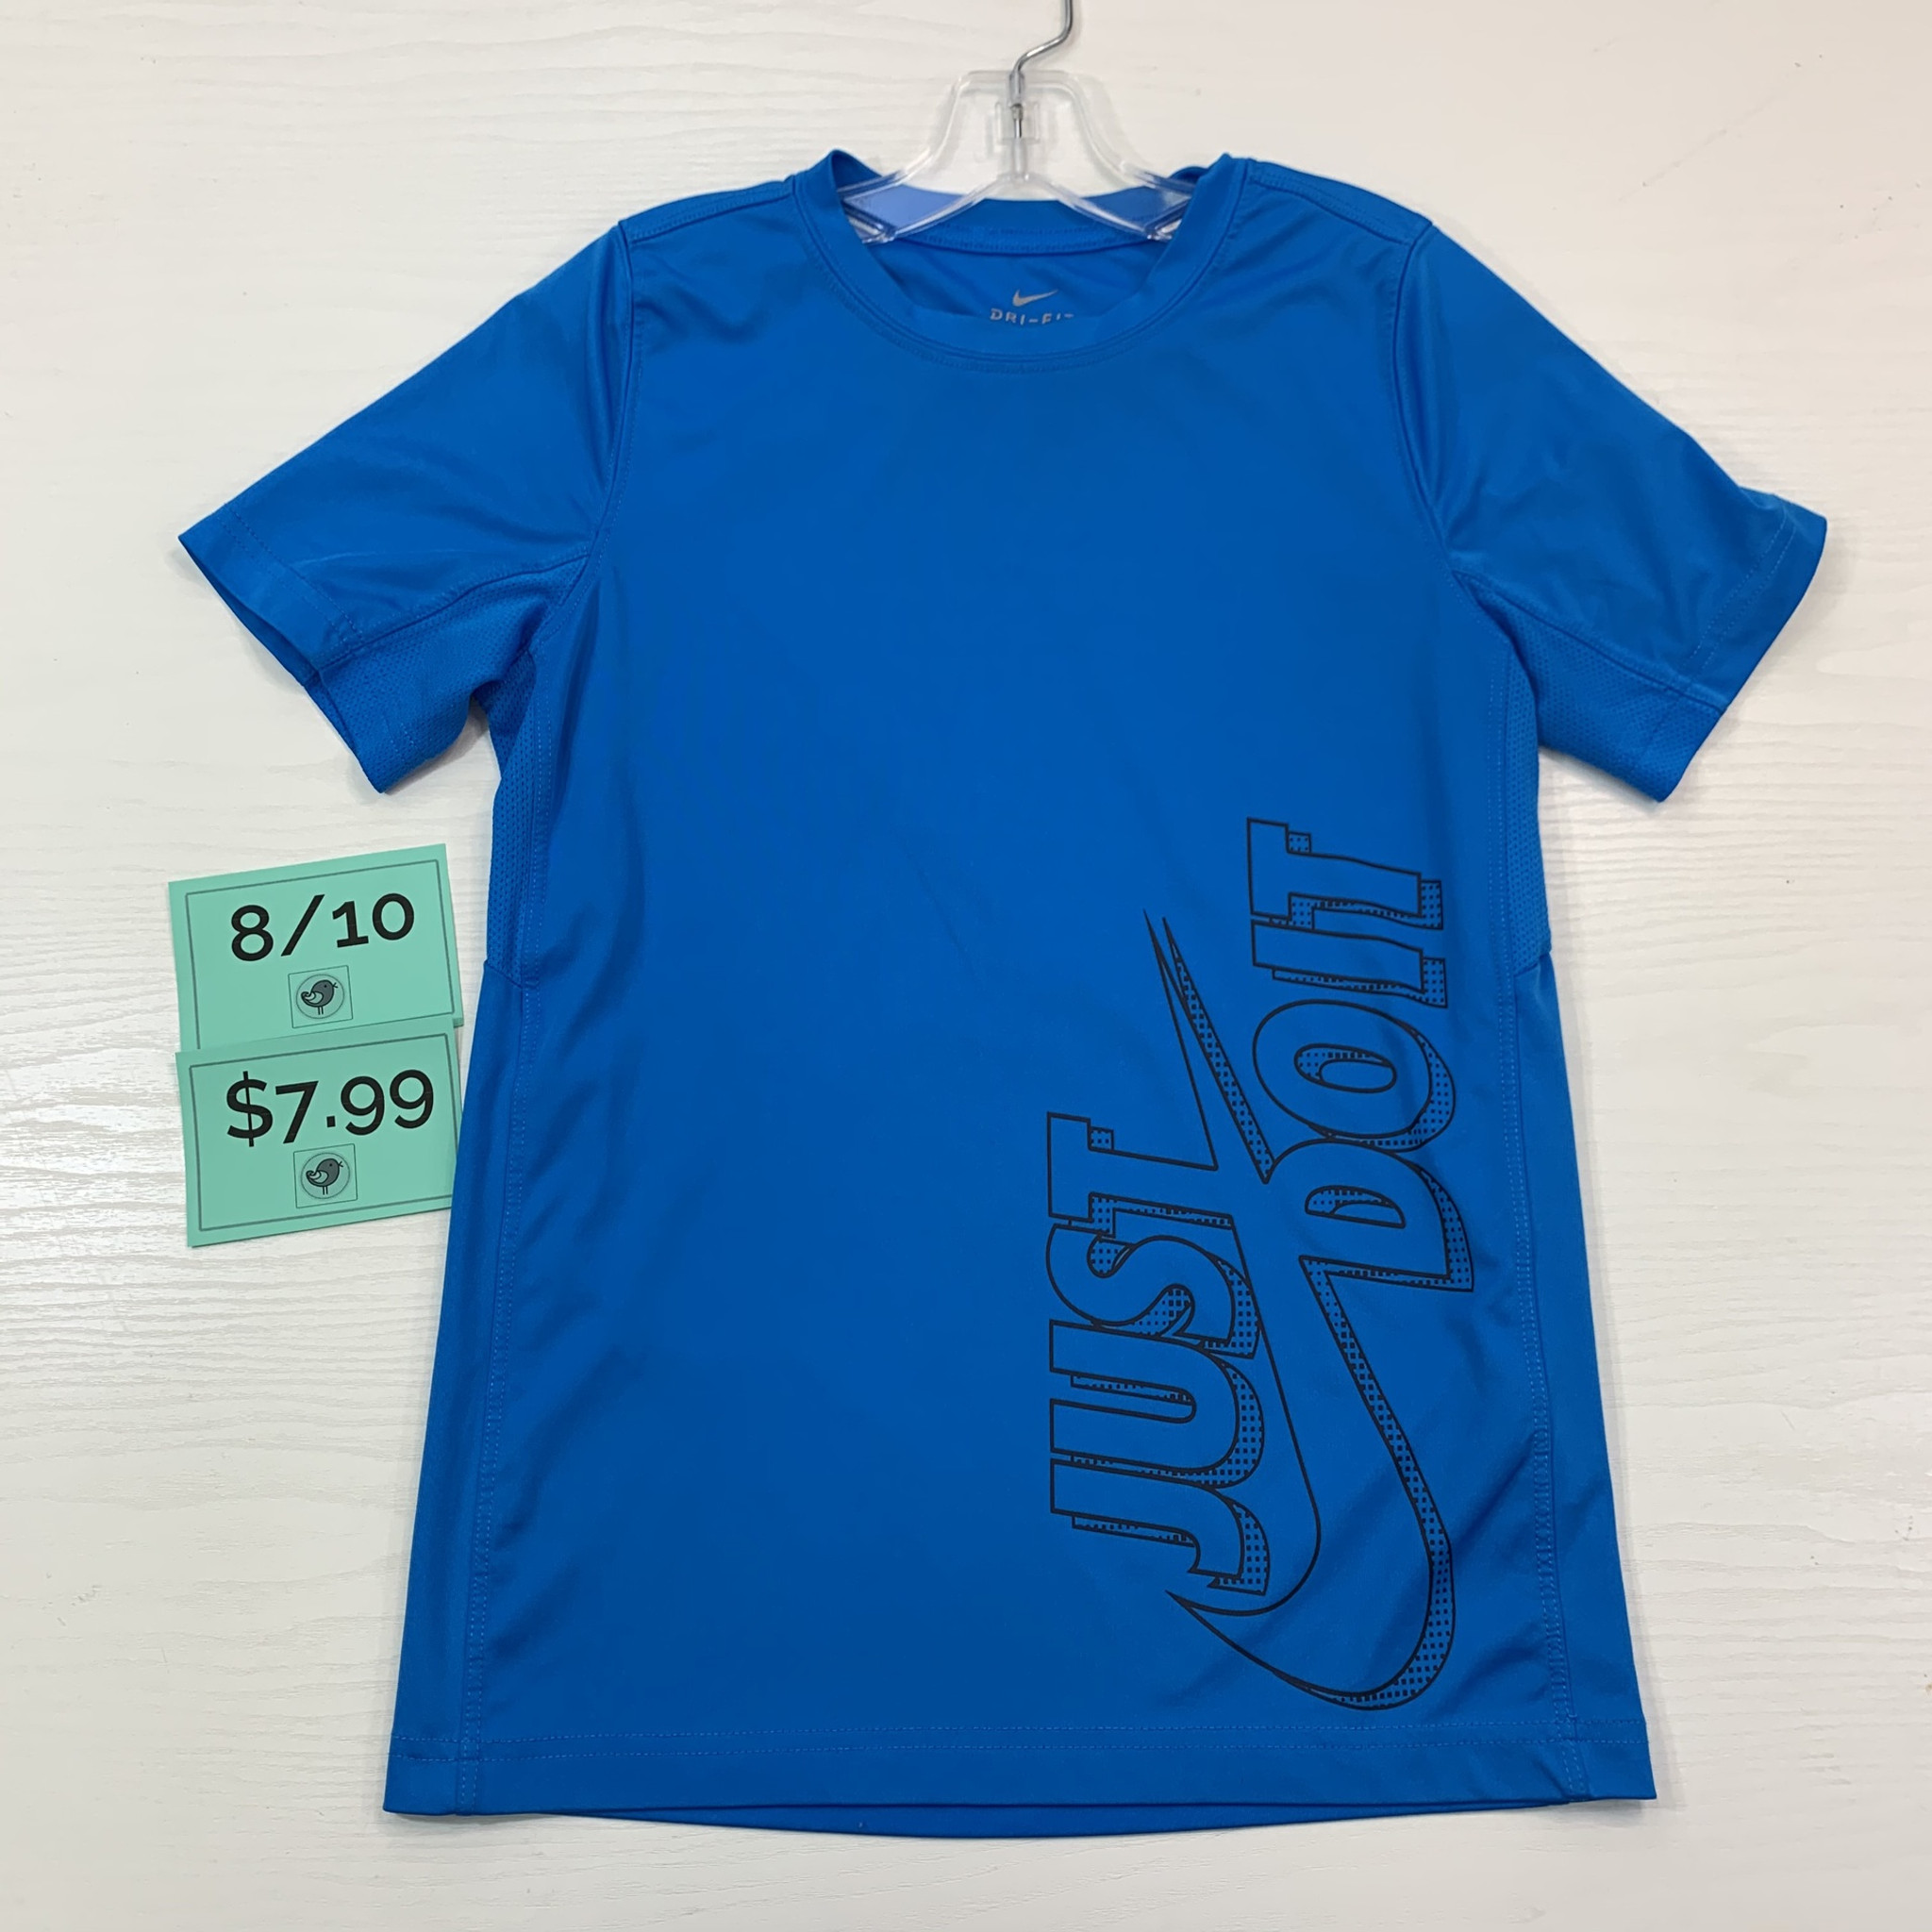 Nike Athletic Shirt Blue 8/10 - Little Sprouts Growtique